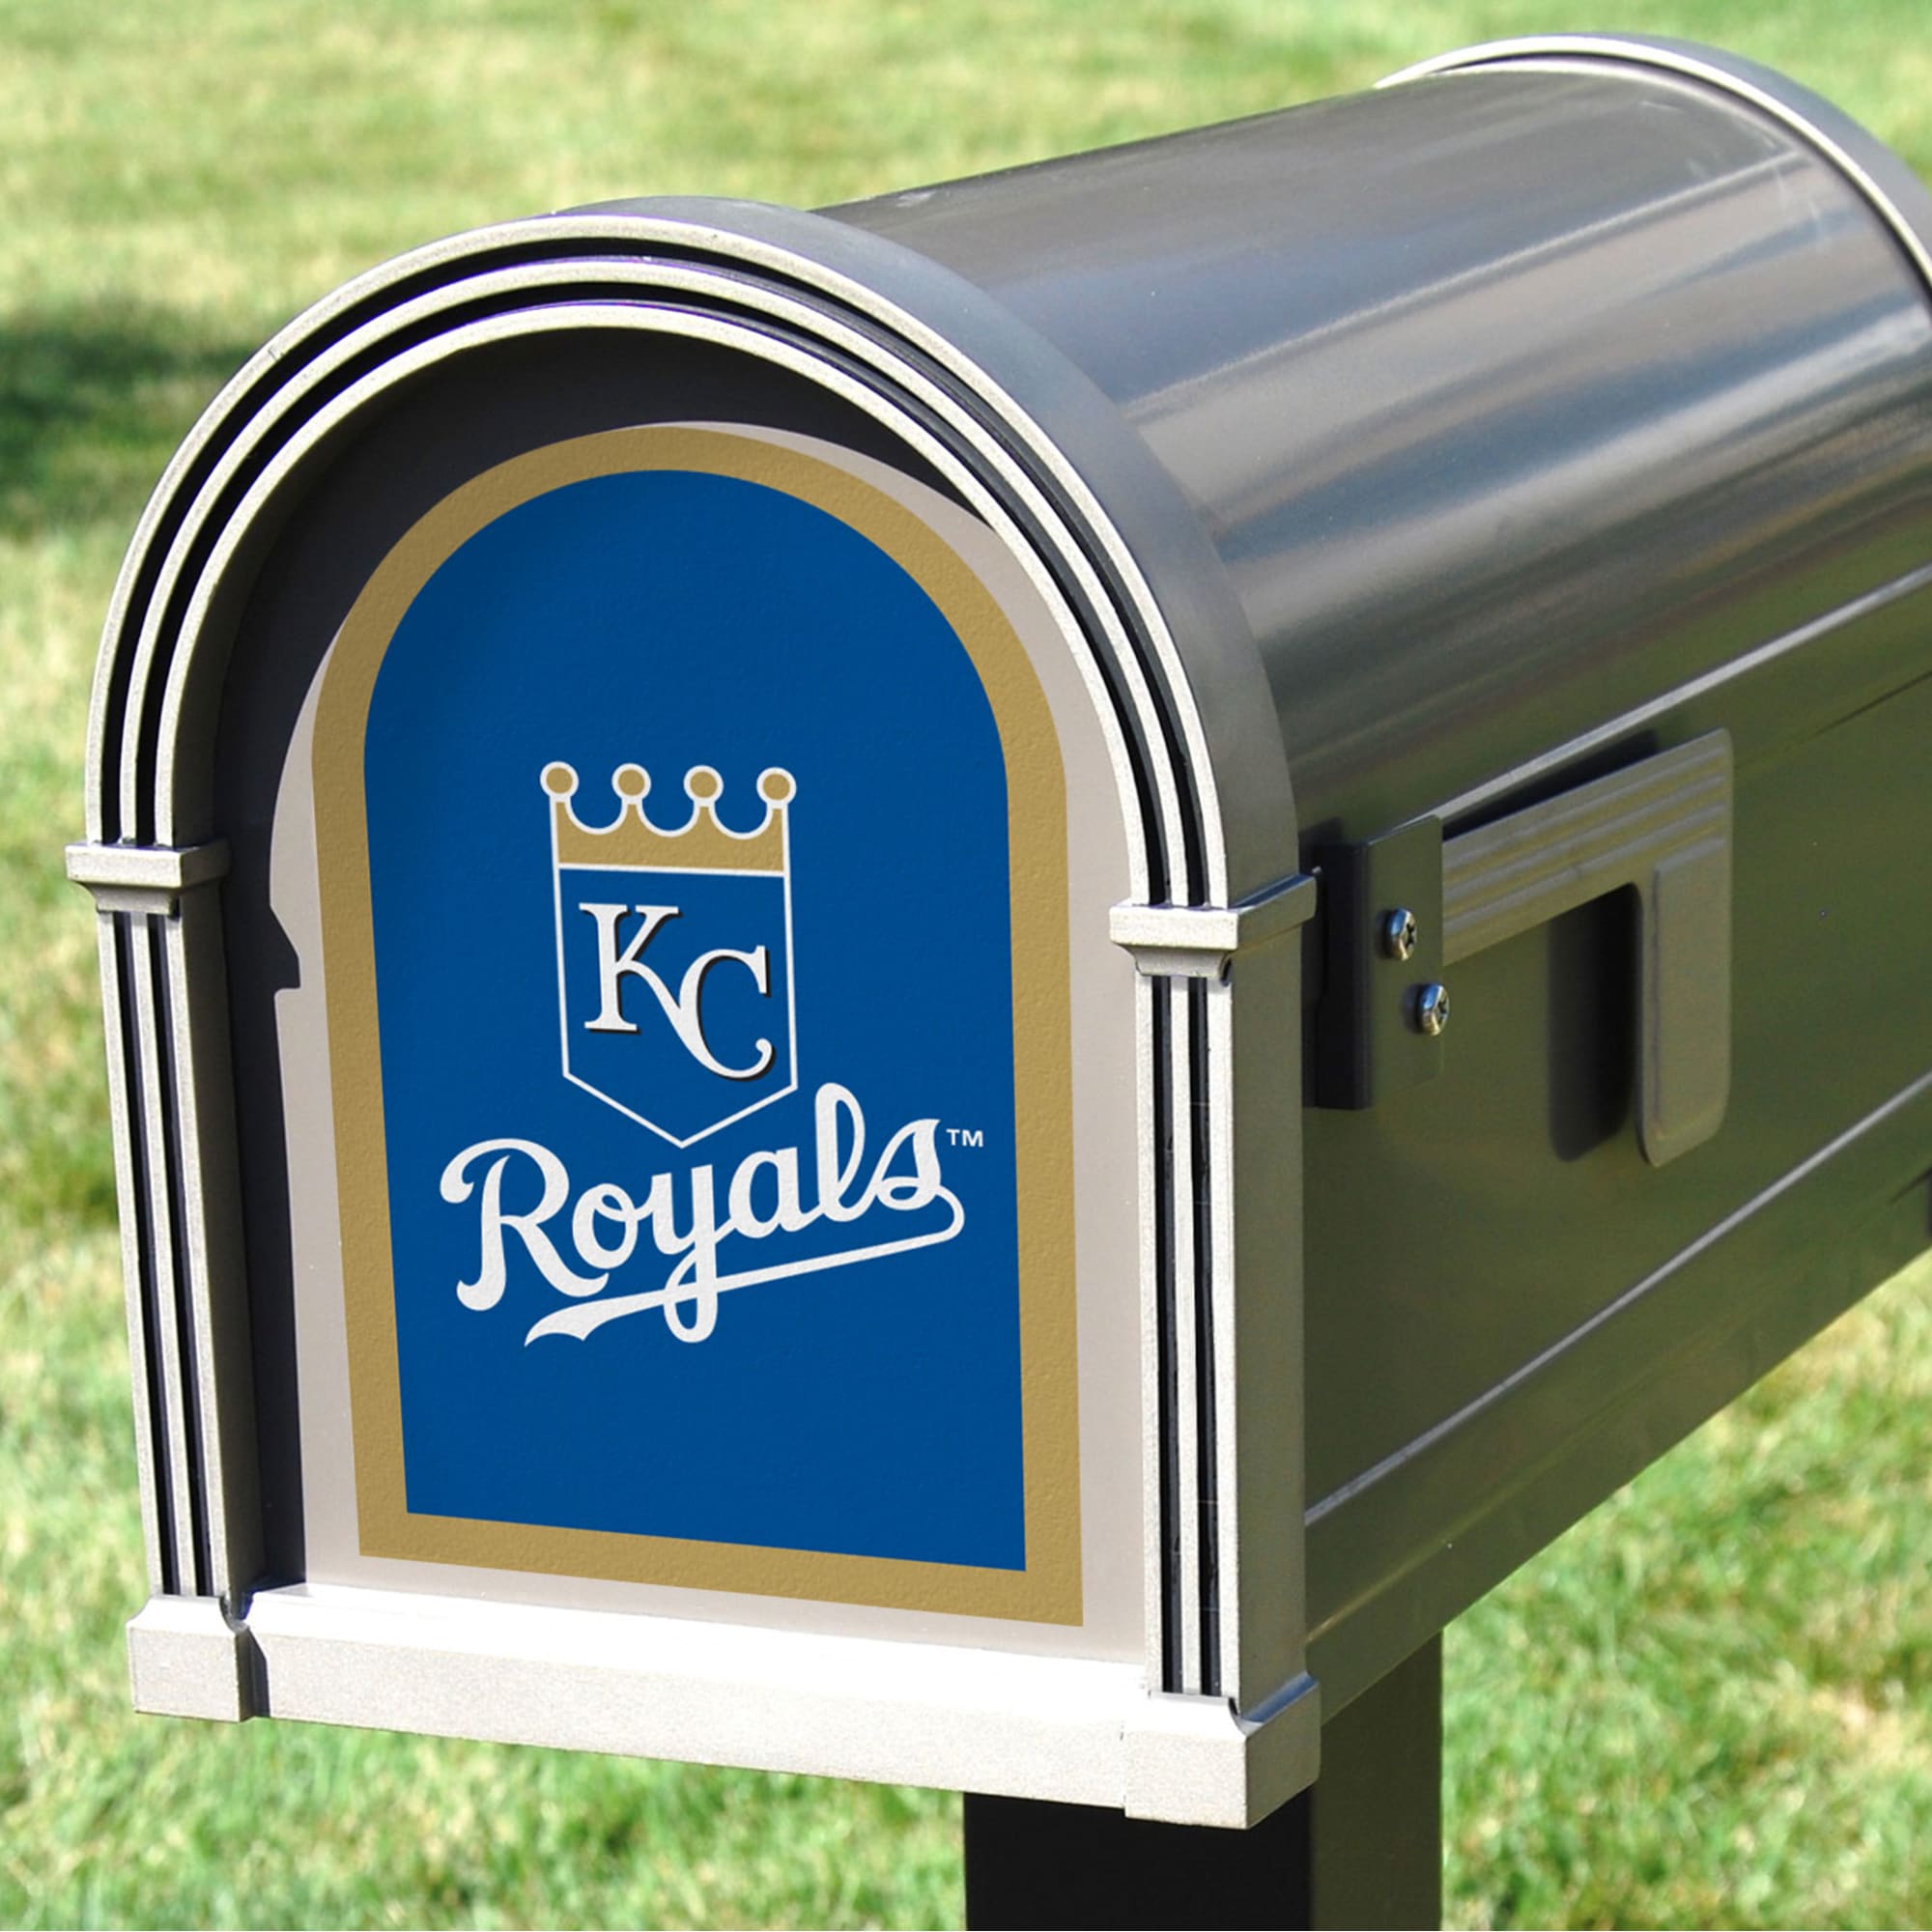 Kansas City Royals: Mailbox Logo - Officially Licensed MLB Outdoor Graphic 5.0"W x 8.0"H by Fathead | Wood/Aluminum